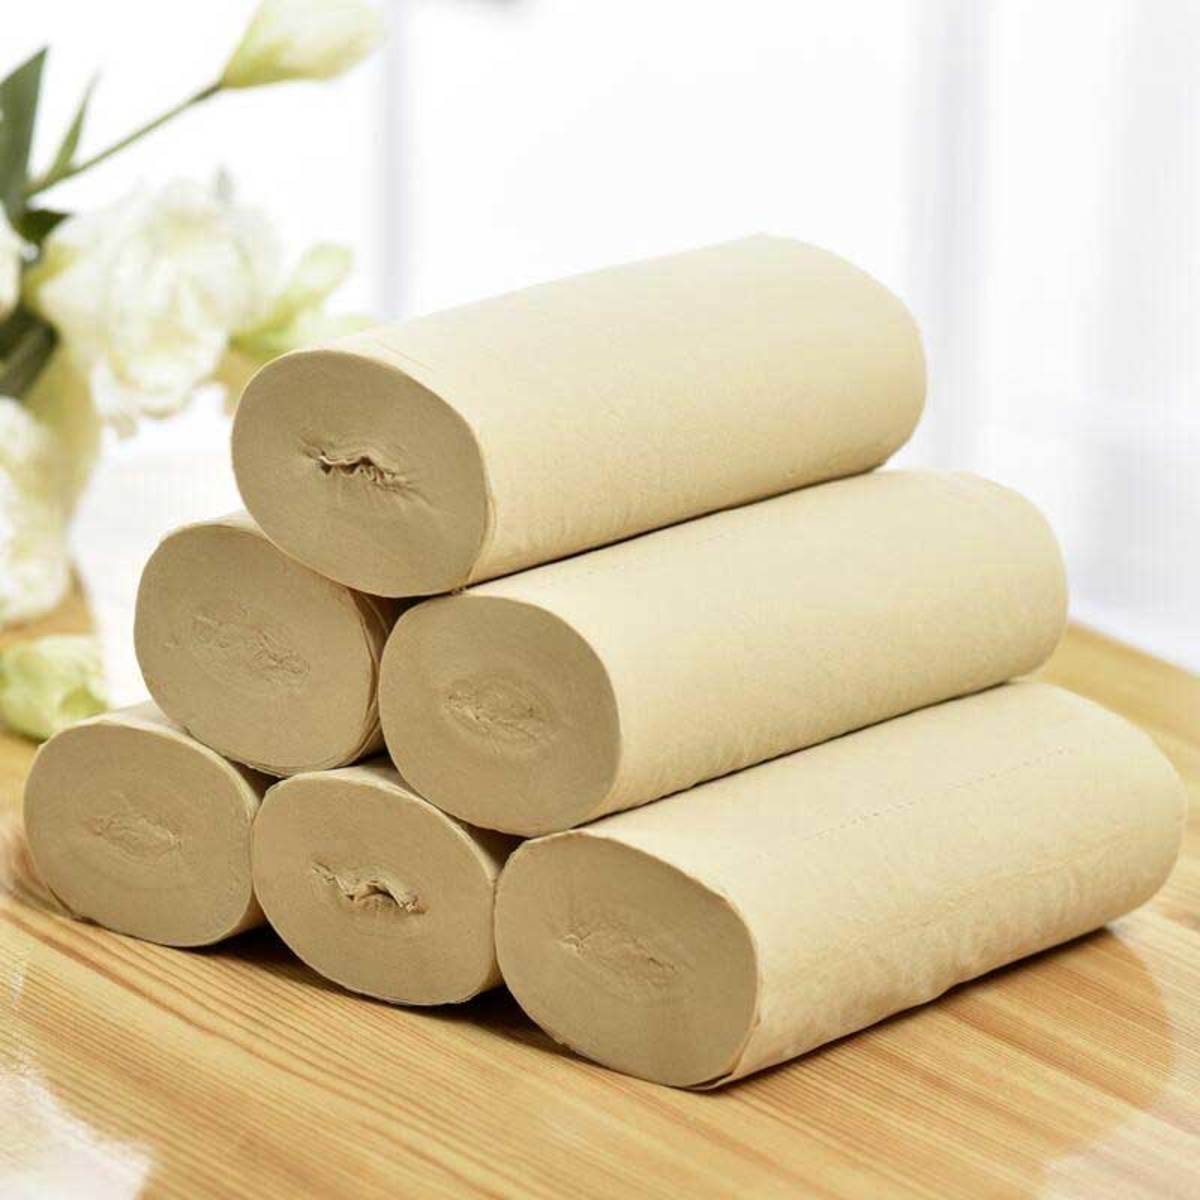 What Pulp is Used for Making Toilet Paper Towel?